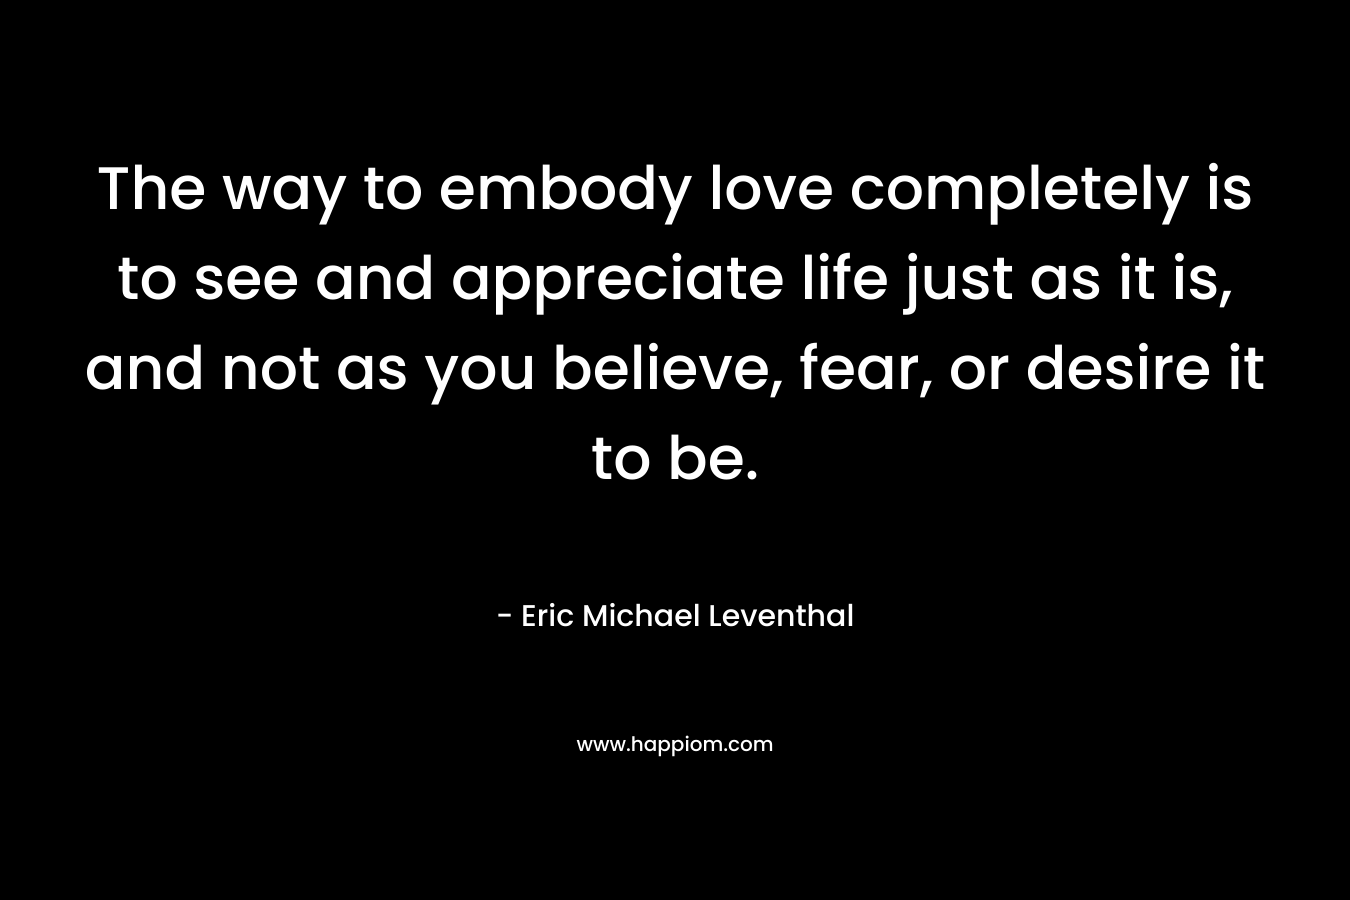 The way to embody love completely is to see and appreciate life just as it is, and not as you believe, fear, or desire it to be.